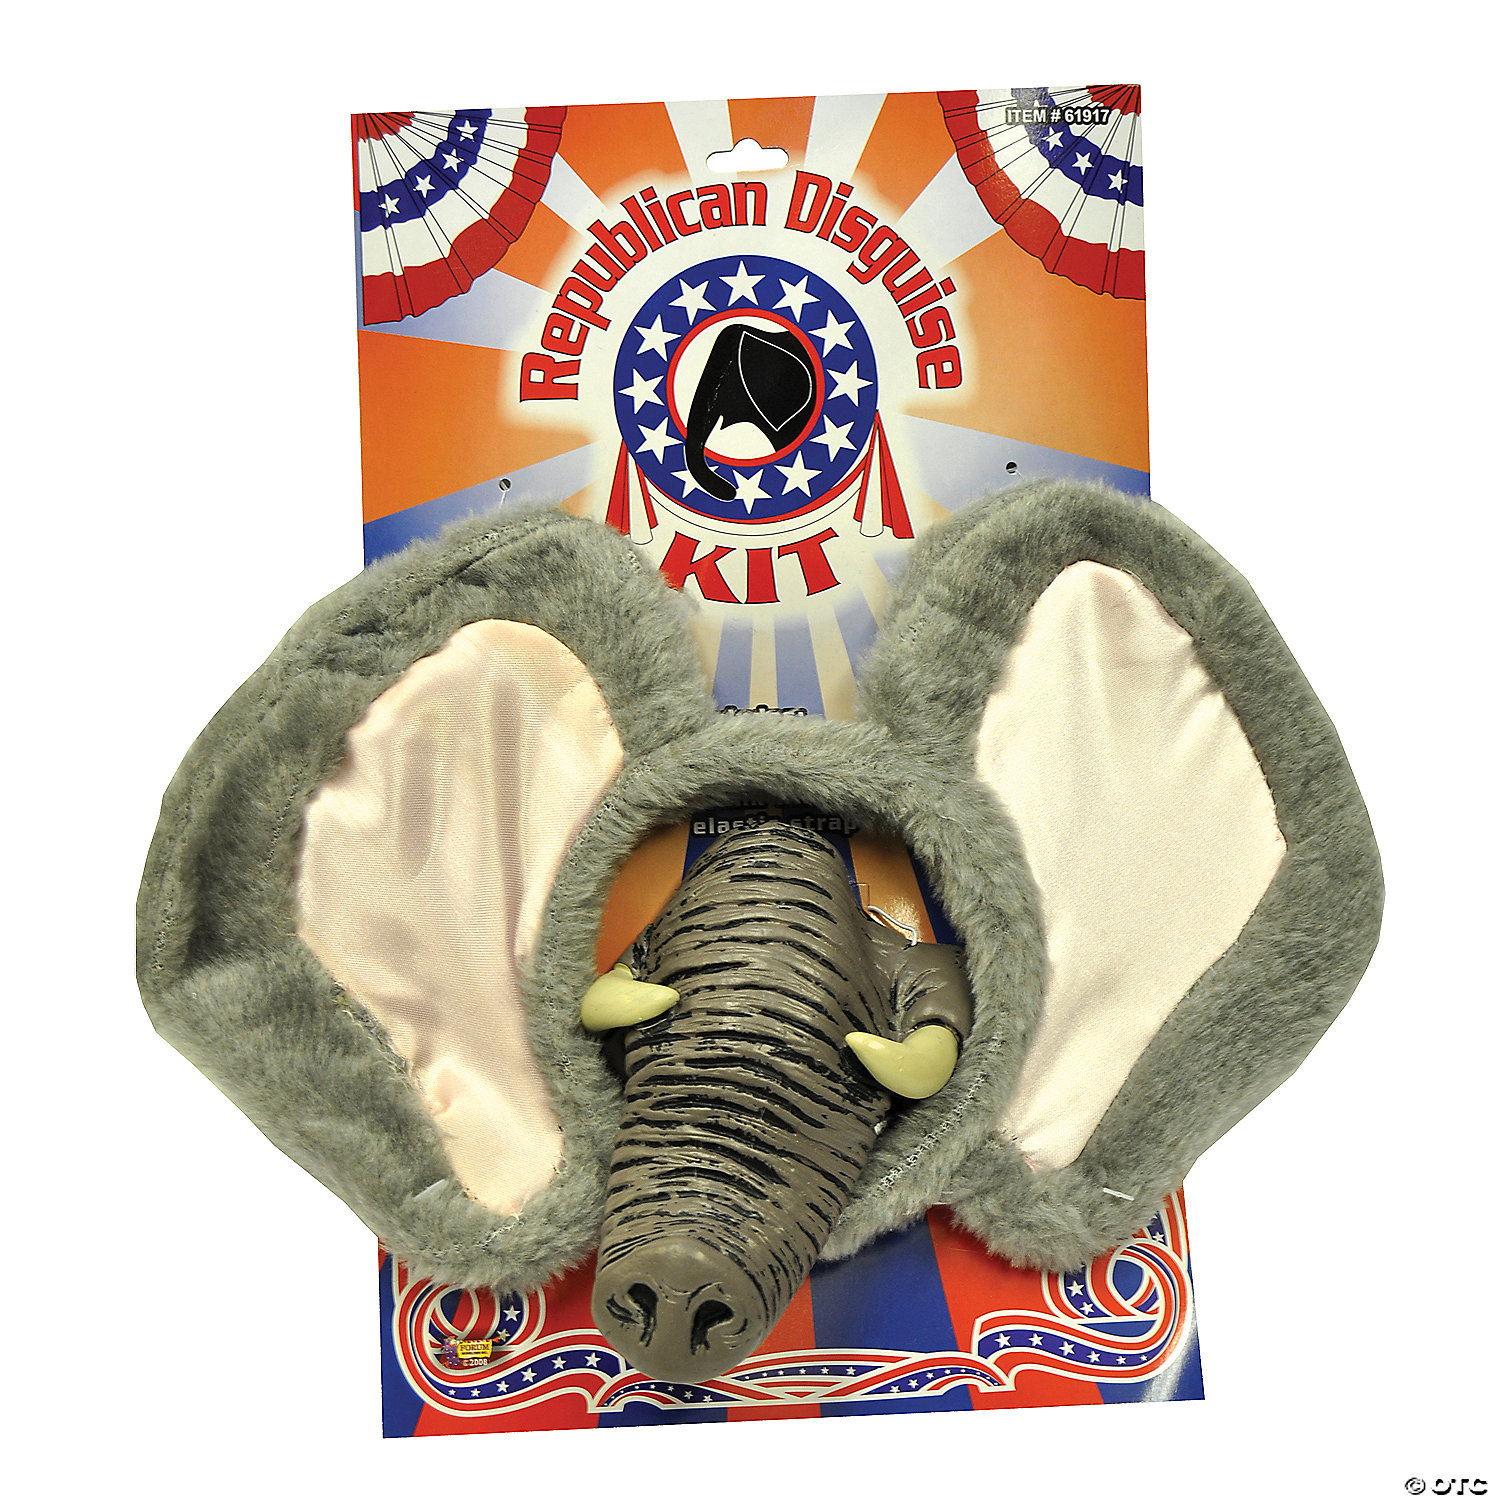 REPUBLICAN ELEPHANT COSTUME KIT - FOURTH OF JULY